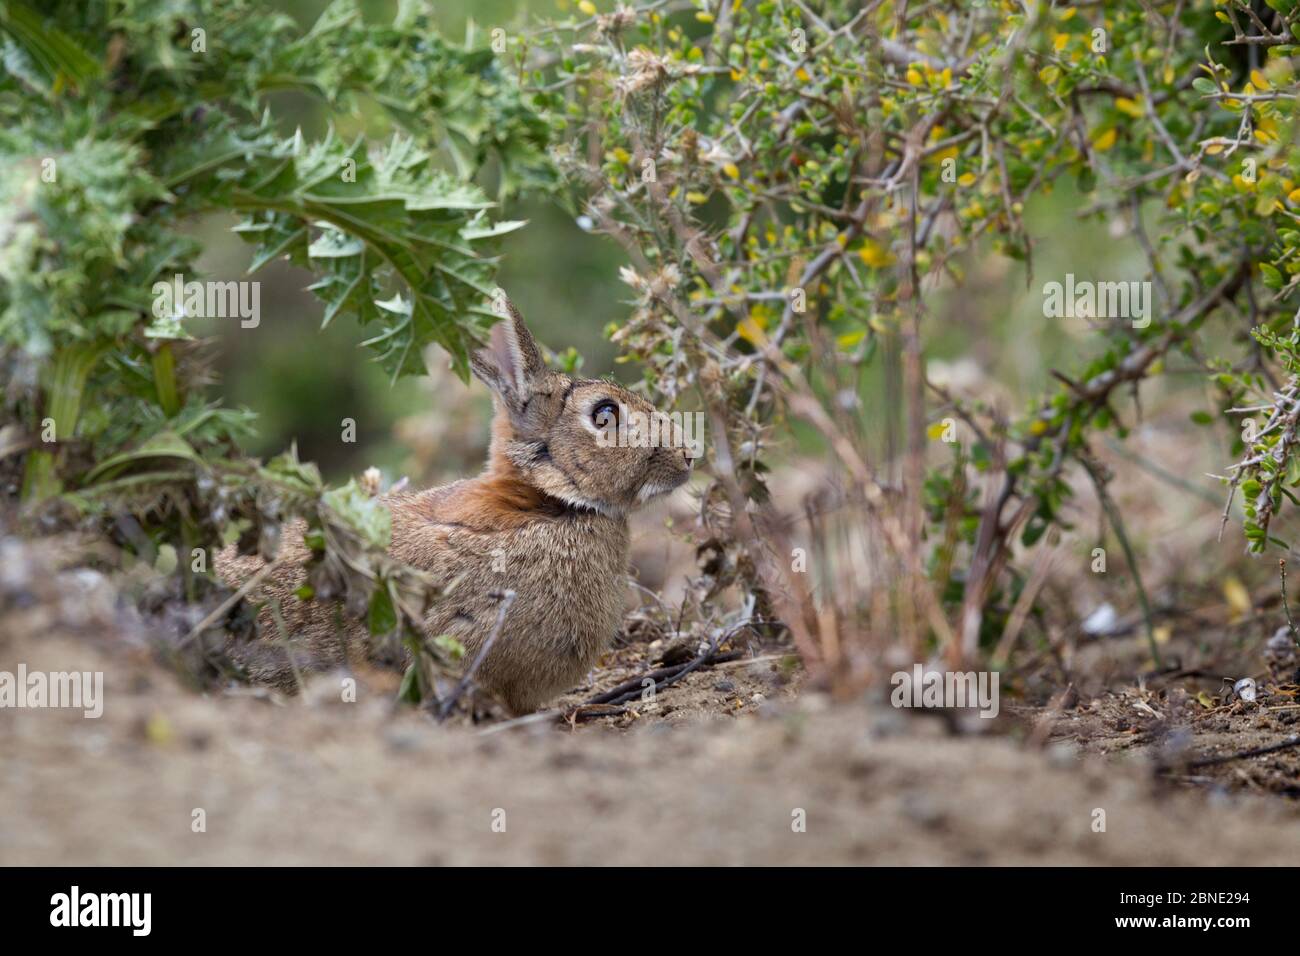 European rabbit (Oryctolagus cuniculus) in vegetation, Cape Kidnappers, Hawkes Bay, New Zealand, November. Introduced species. Stock Photo